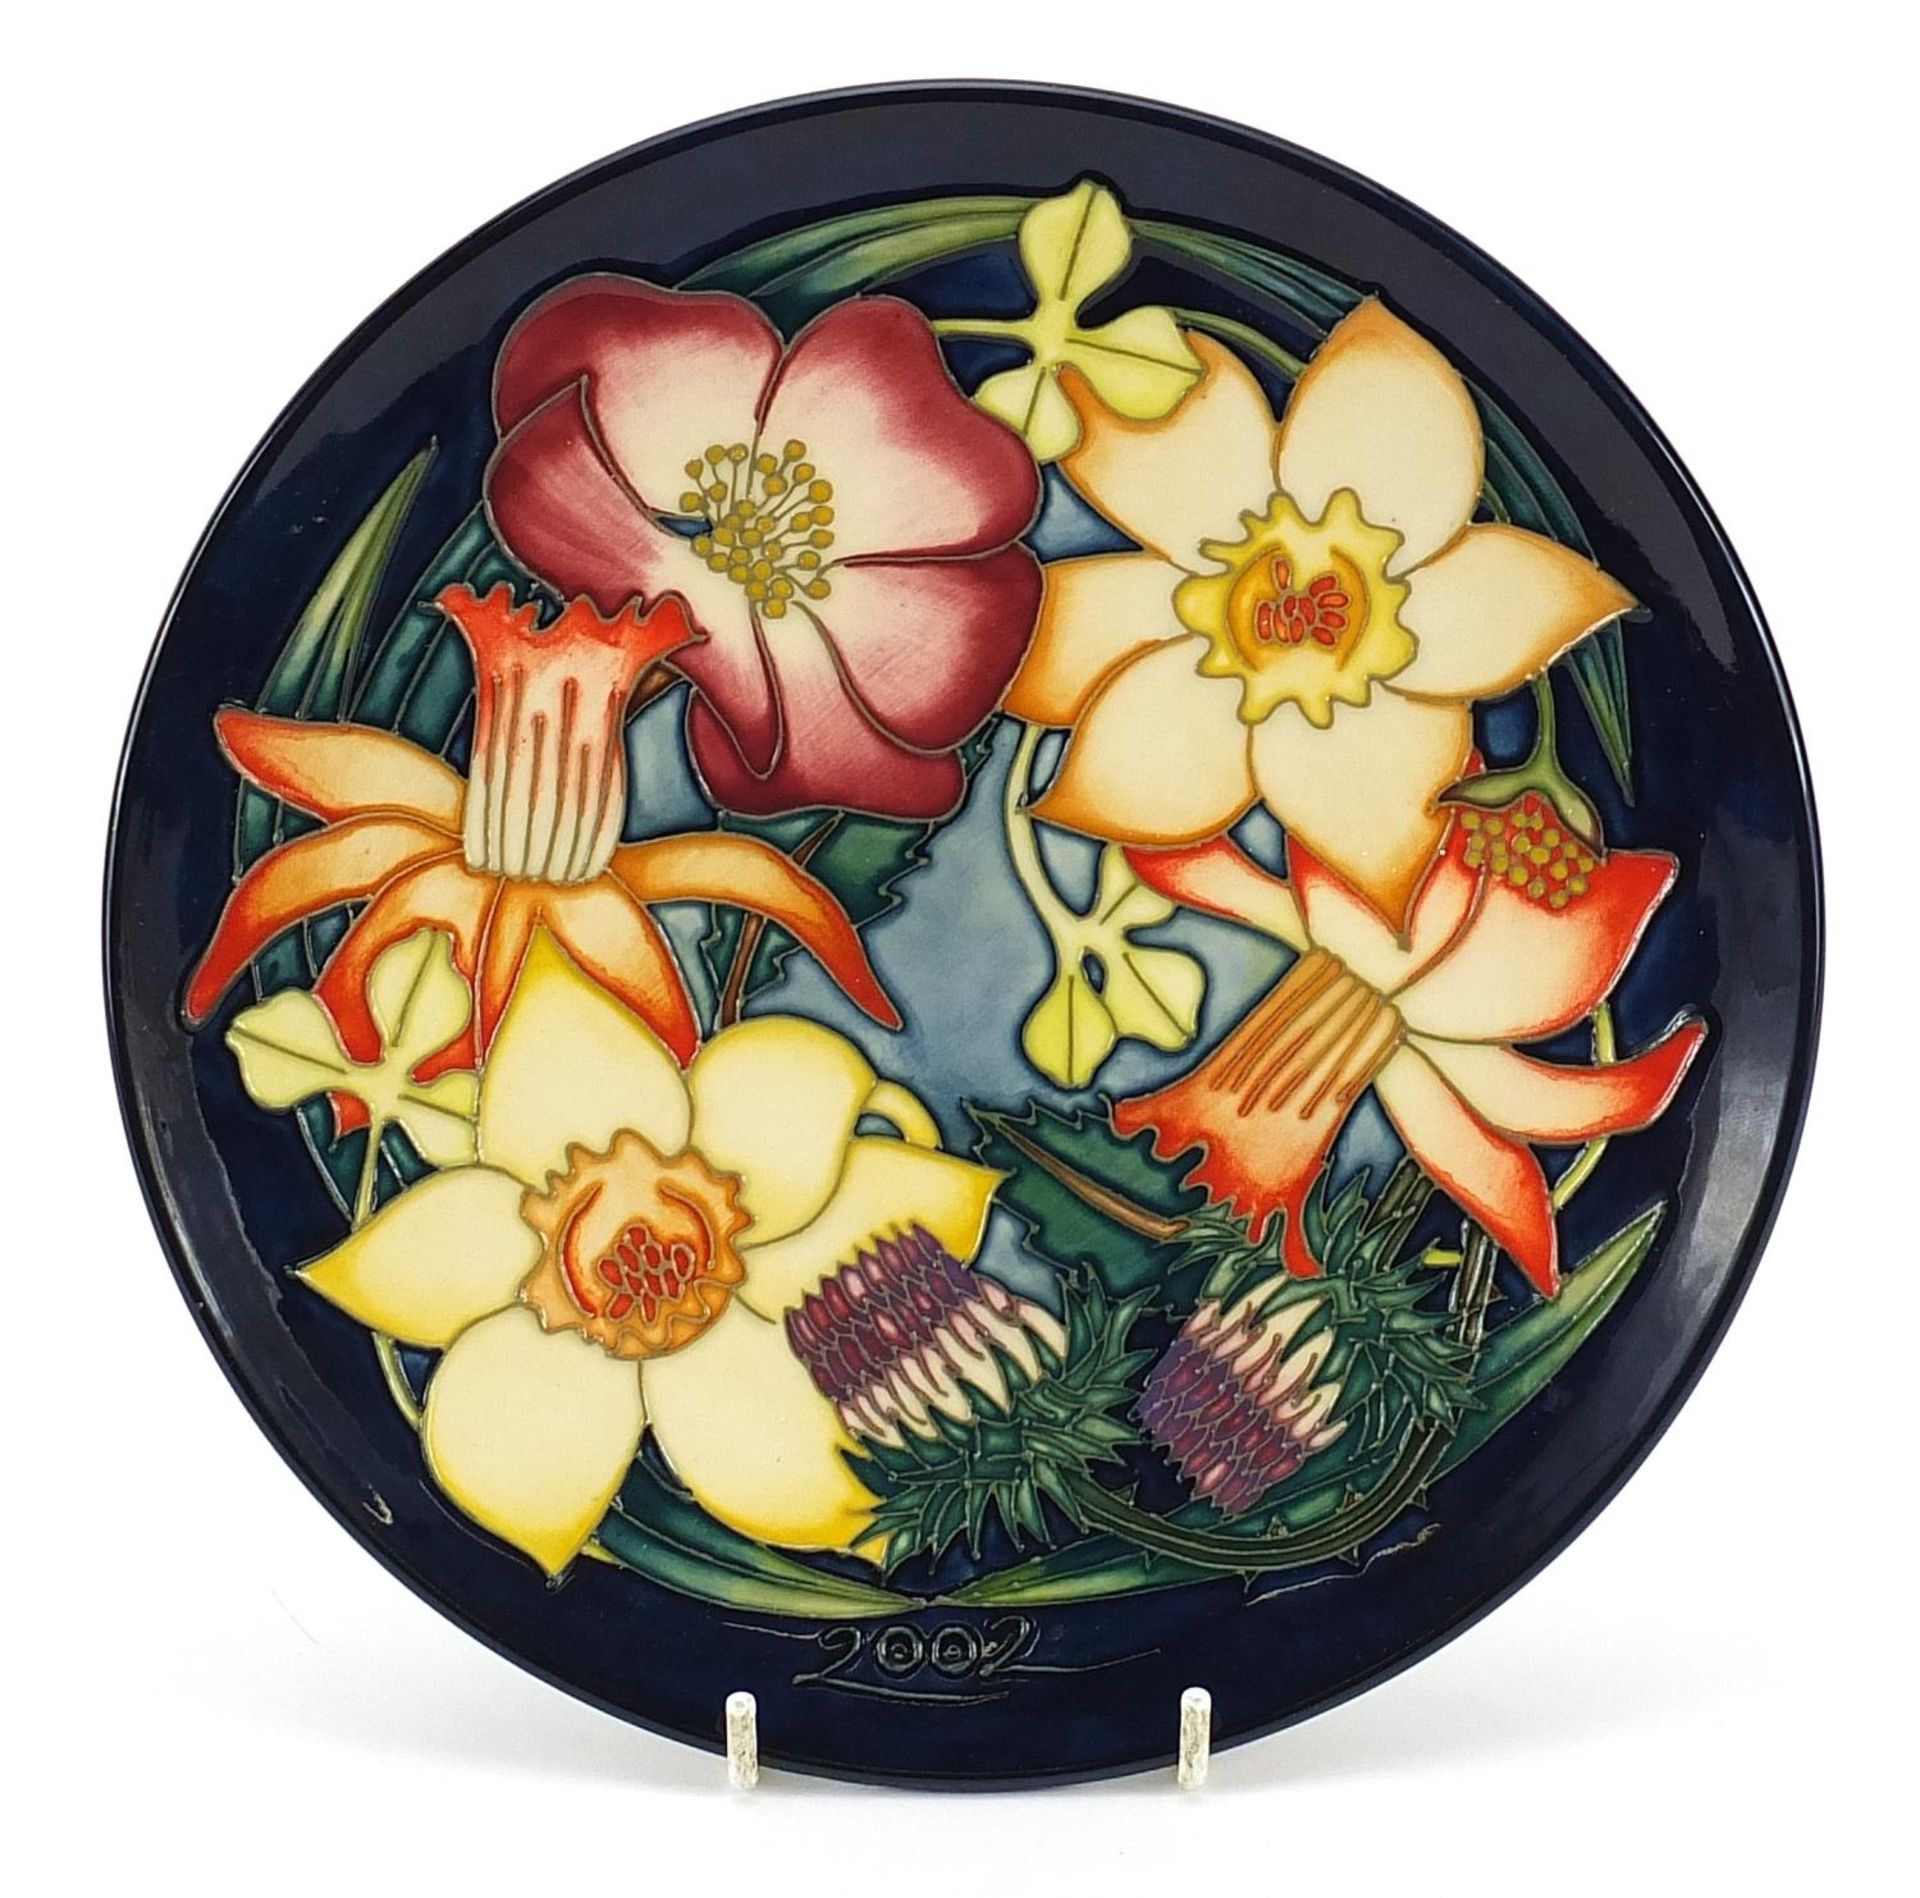 Moorcroft Pottery 2002 Golden Jubilee year plate hand painted with flowers, limited edition 587/750,